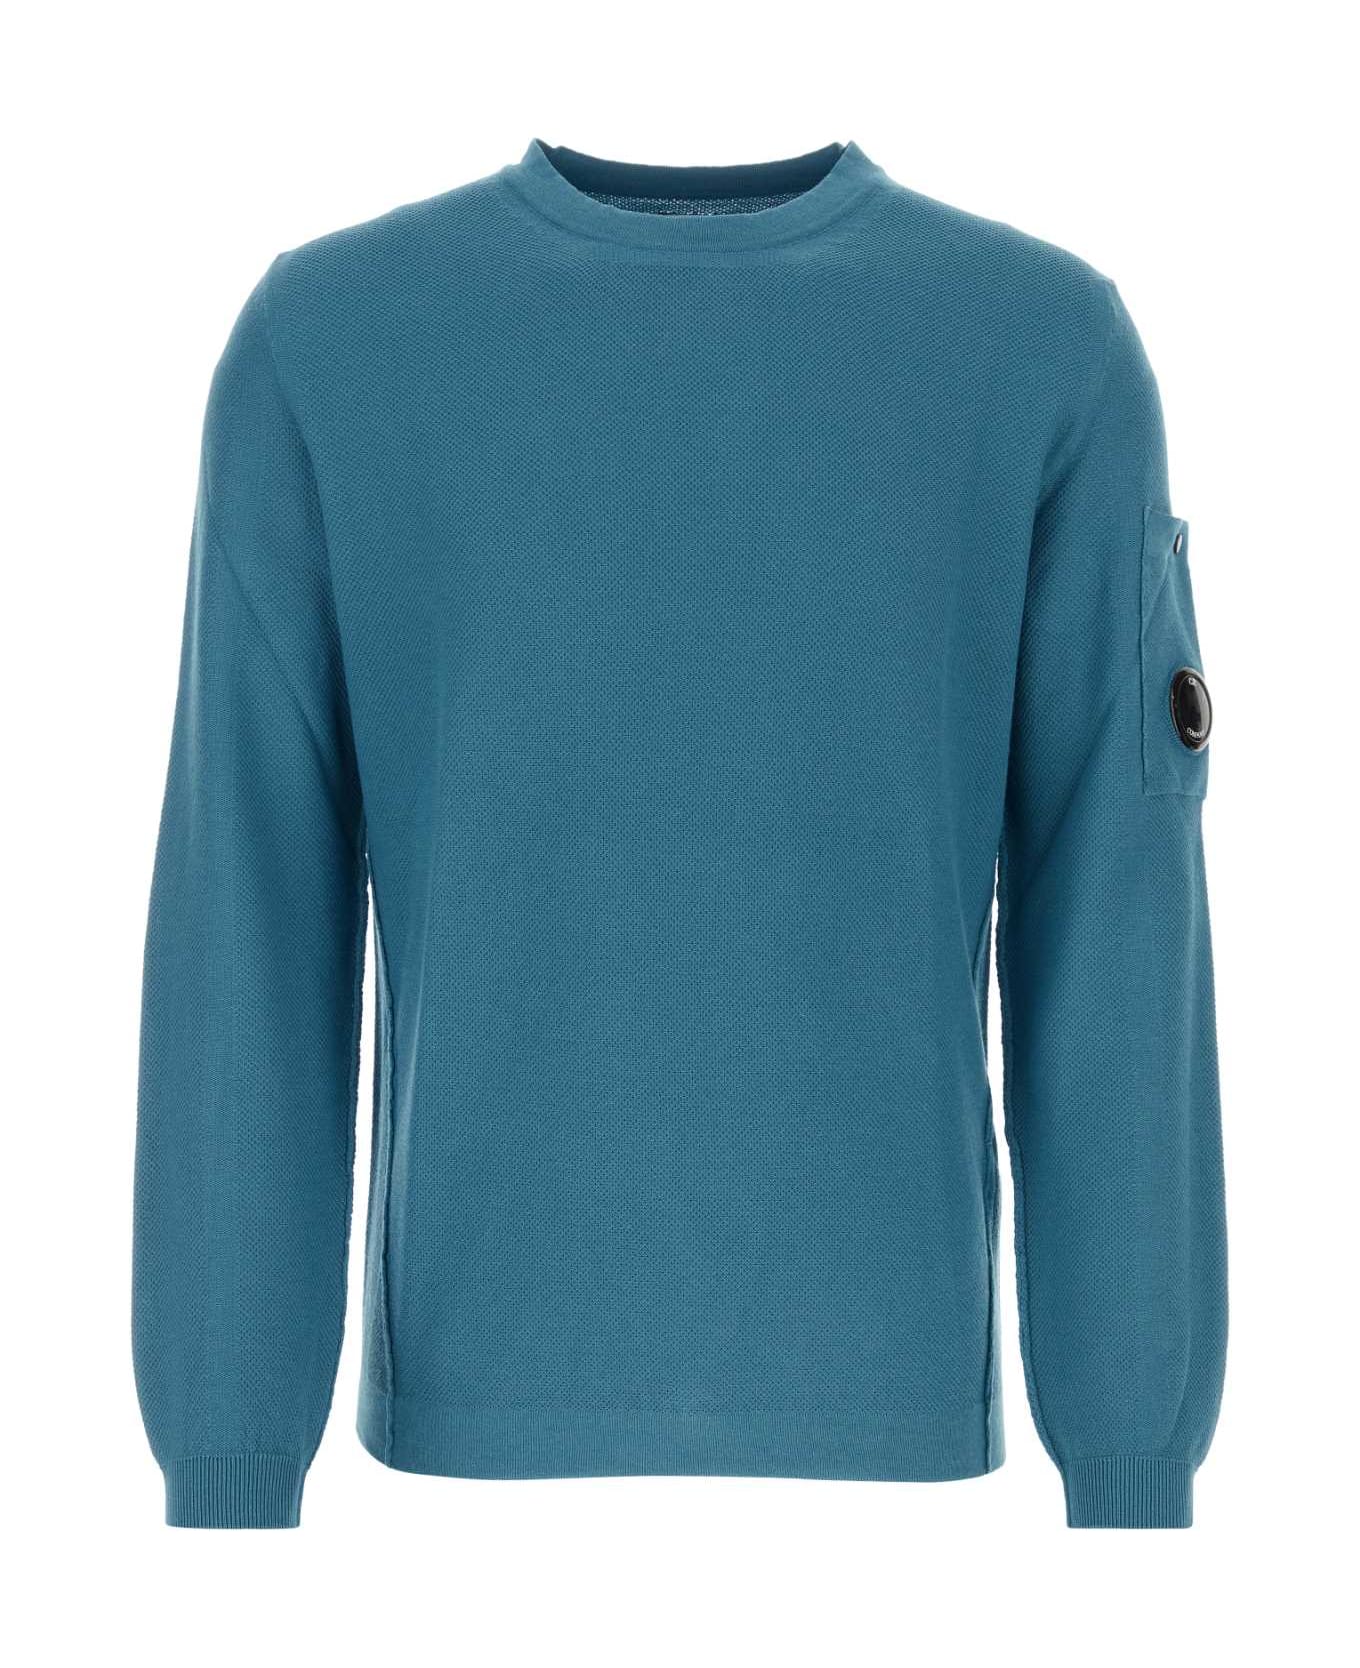 C.P. Company Air Force Blue Cotton Sweater - INKBLUE